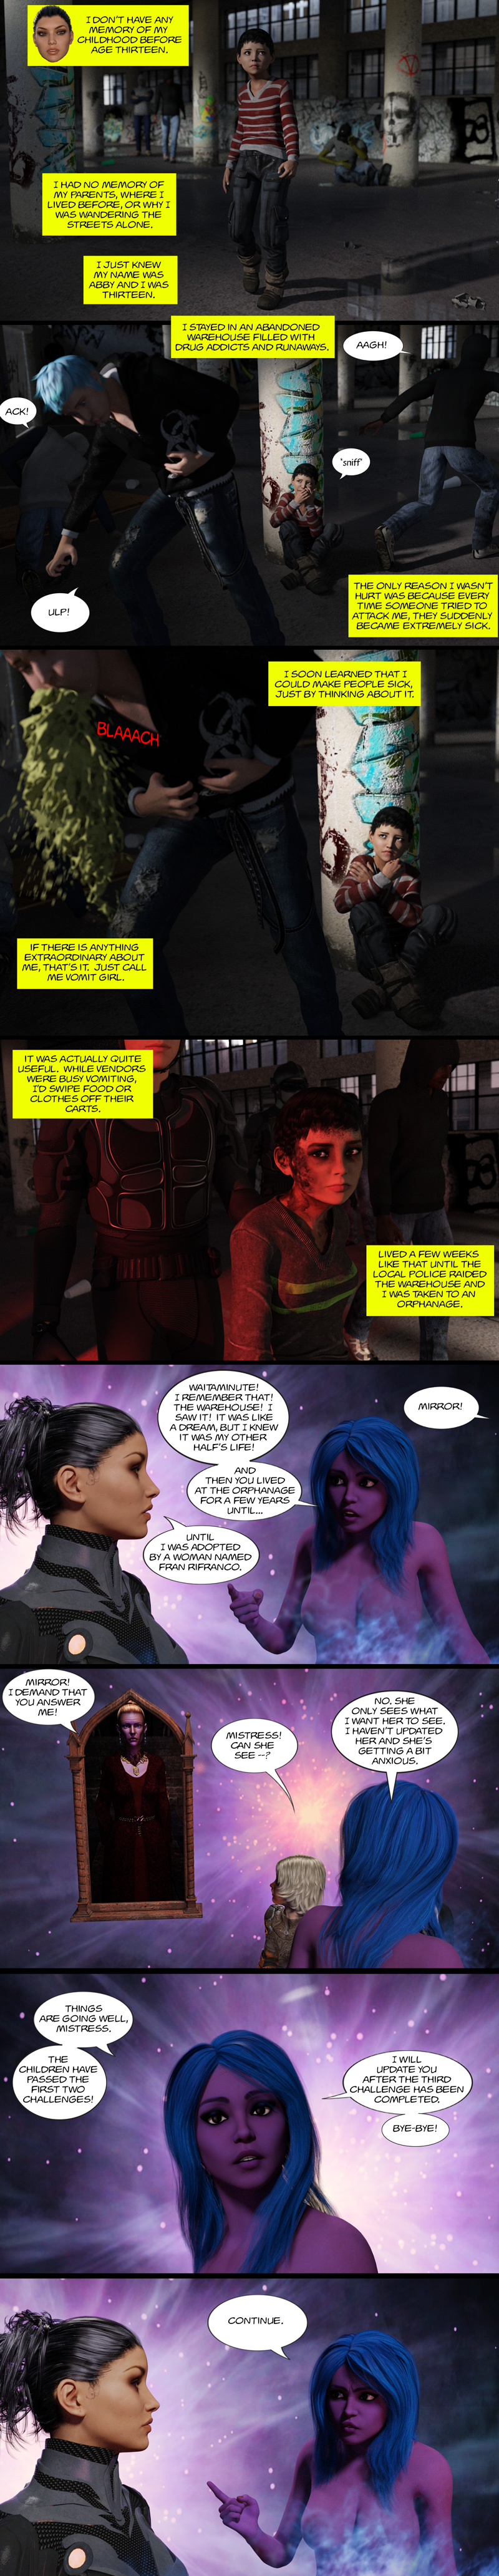 Chapter 13, page 14 – Abby’s story